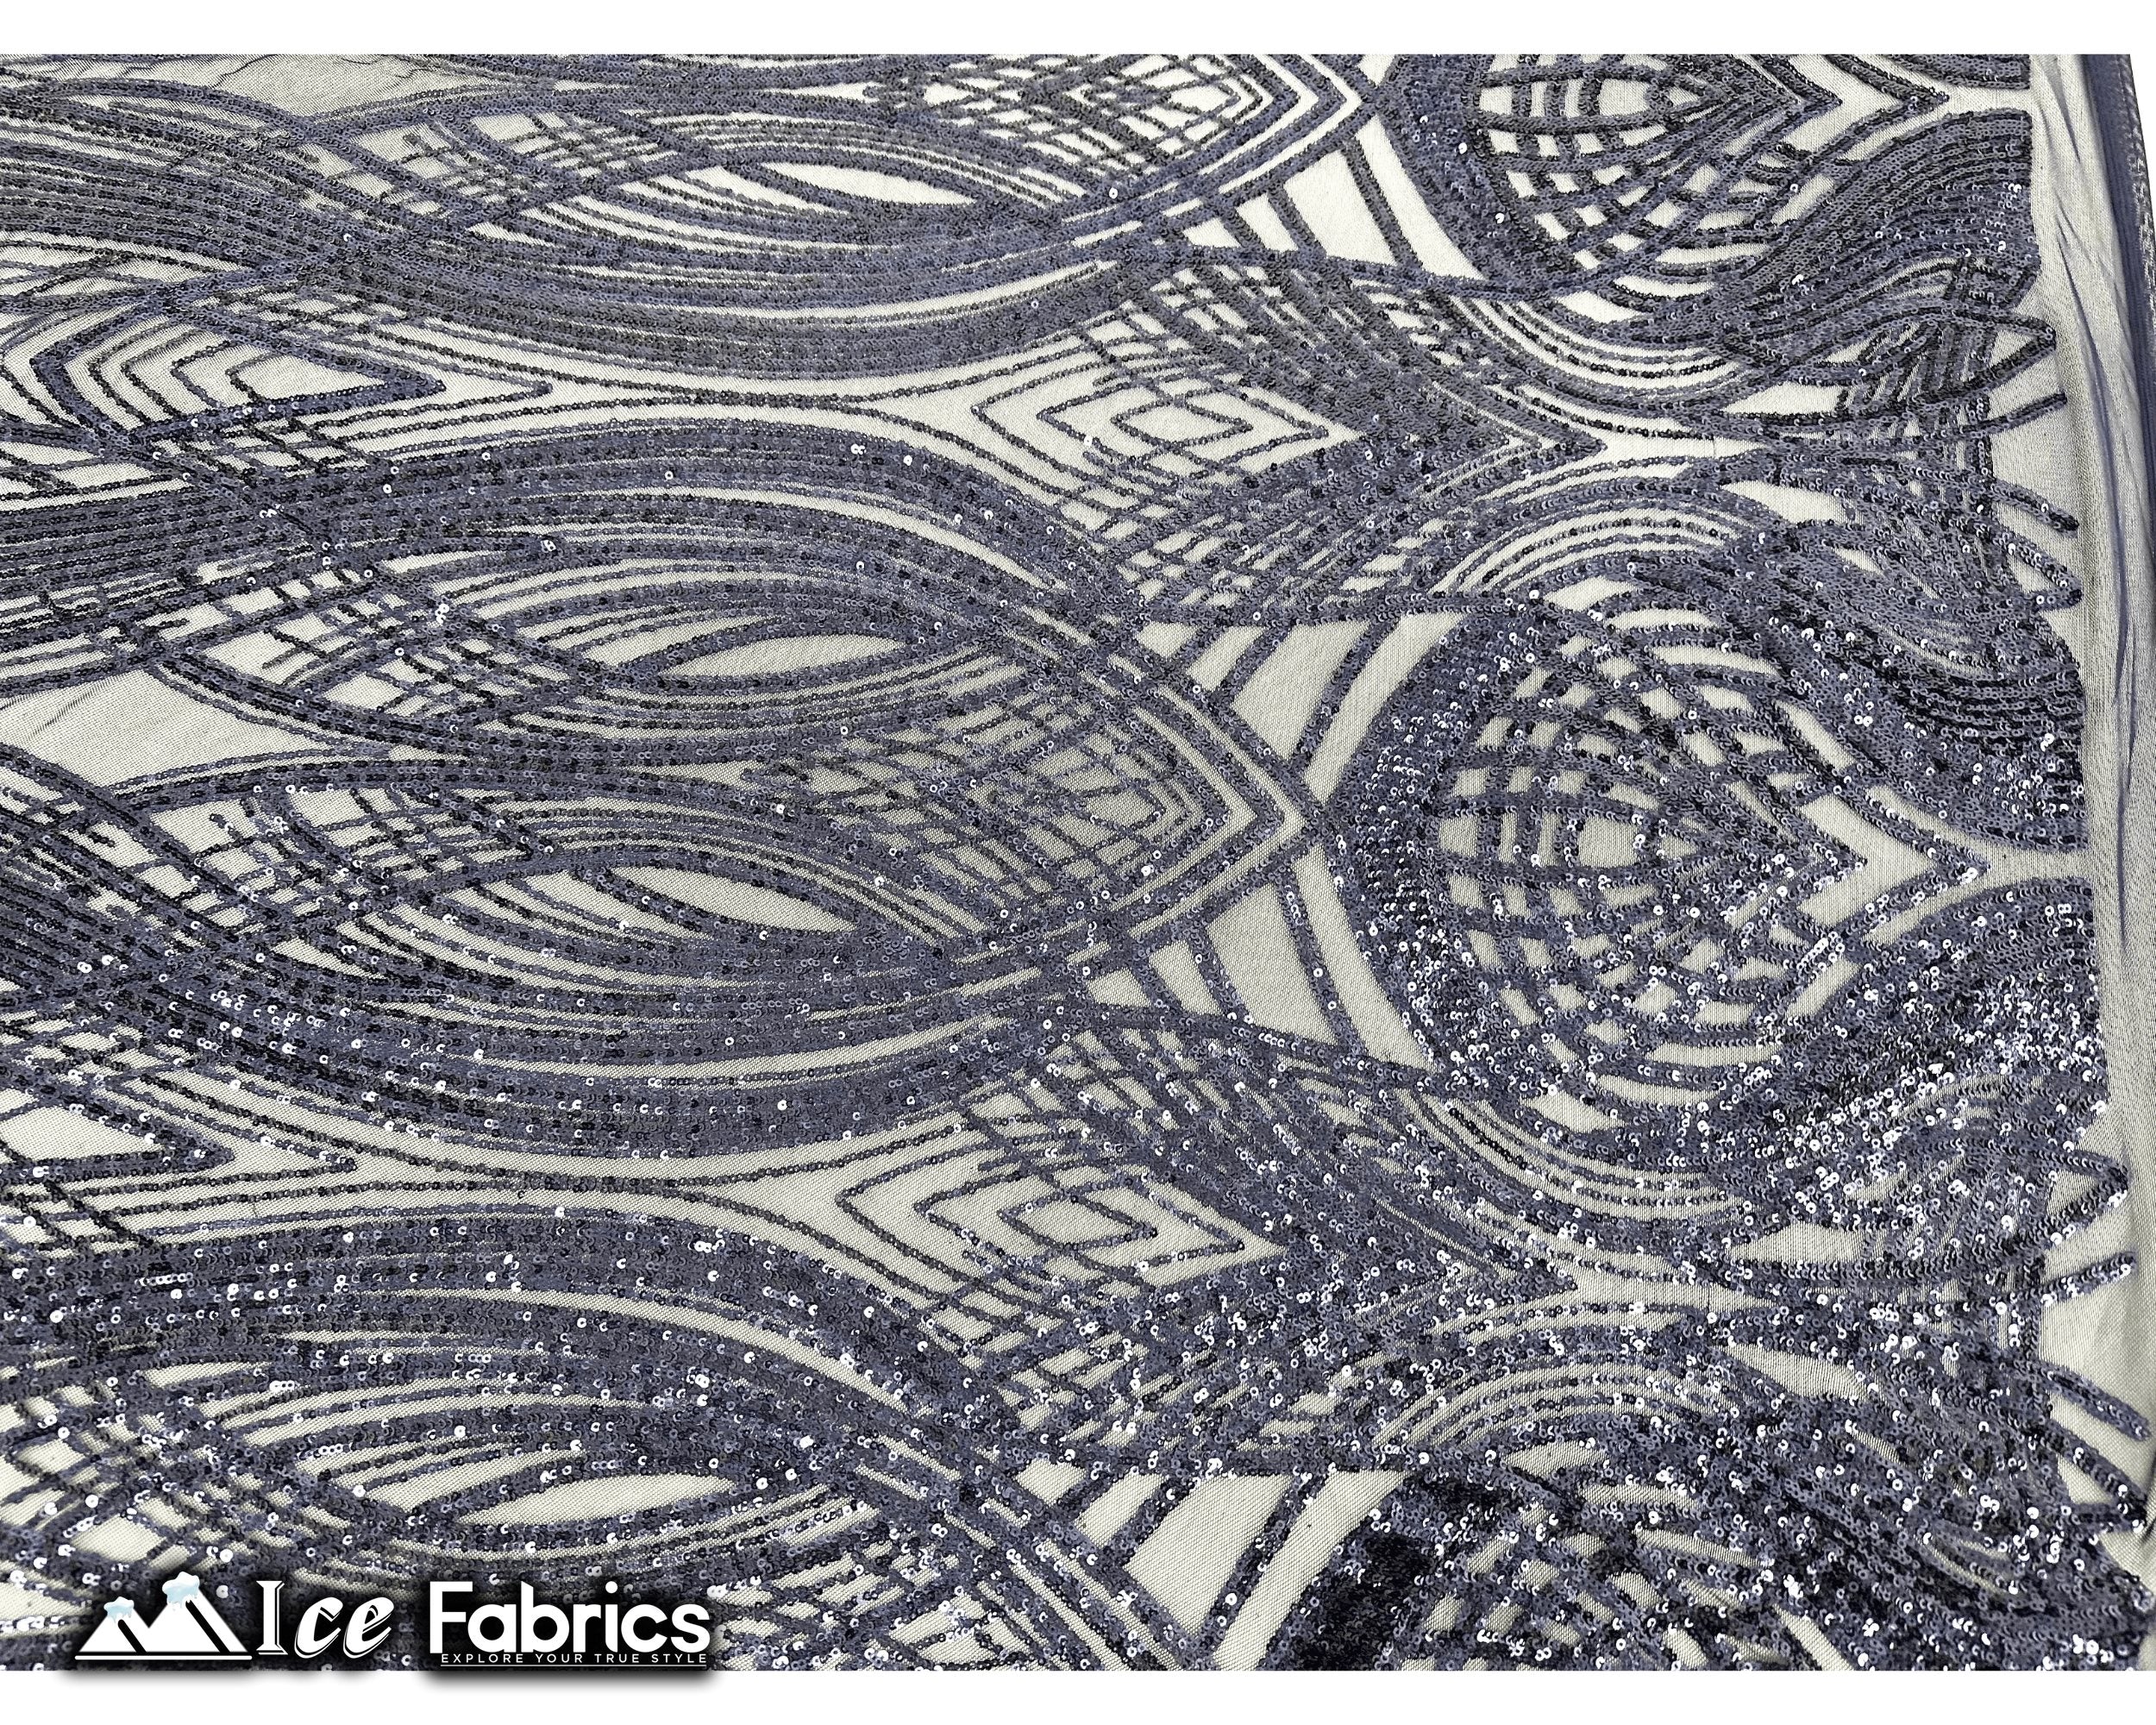 Peacock Sequin Fabric By The Yard 4 Way Stretch Spandex ICE FABRICS Navy Blue